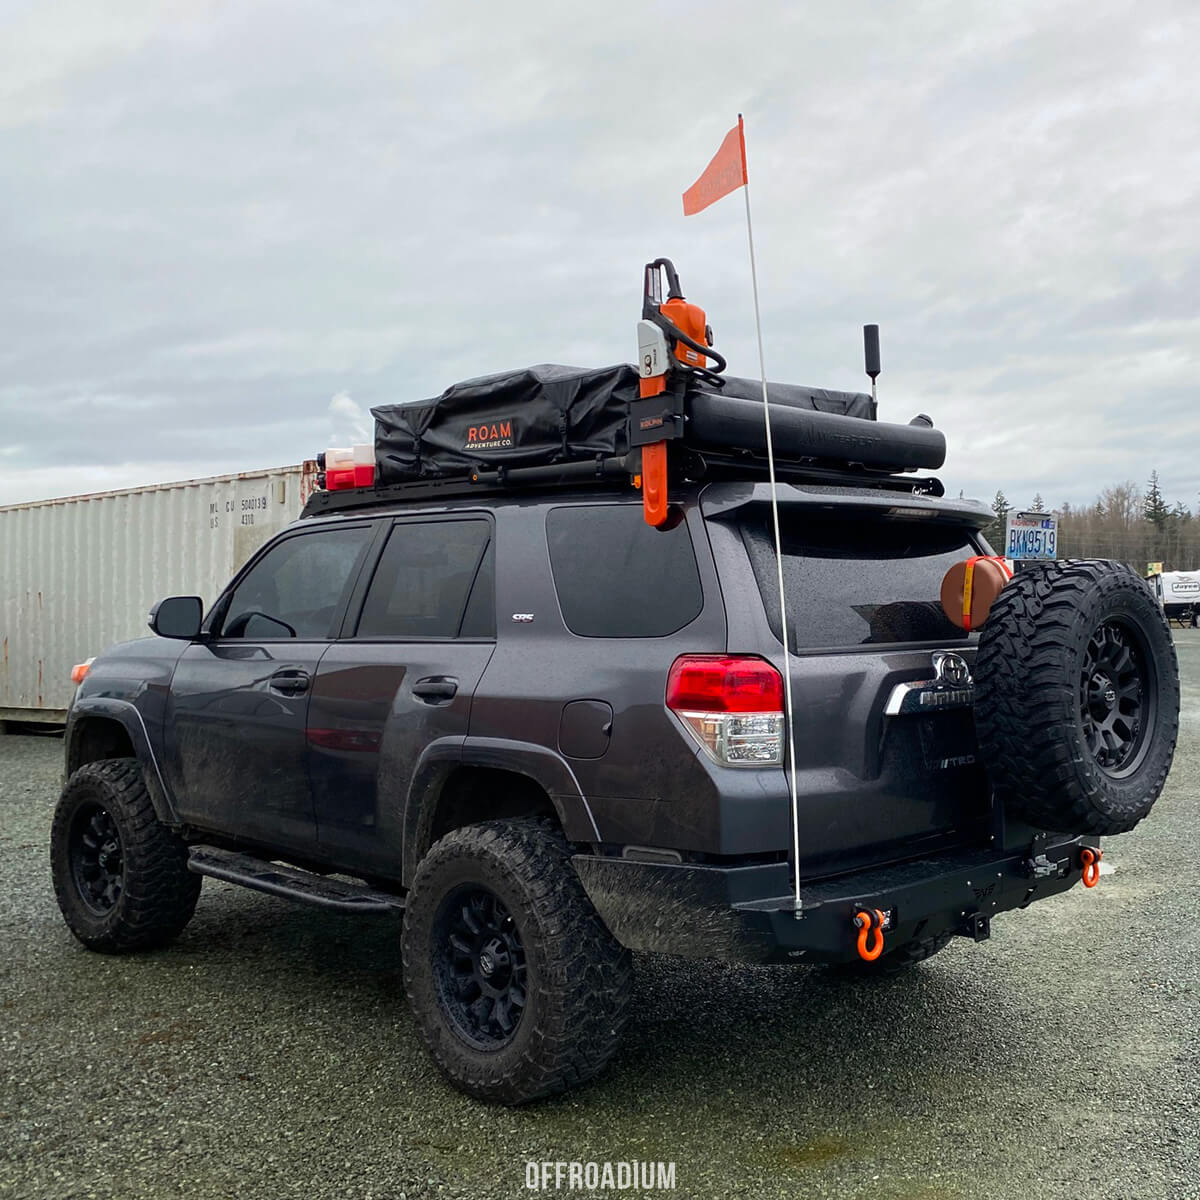 2010 Toyota 4Runner Victory 4×4 rear bumper with rear facing high powered LED lights